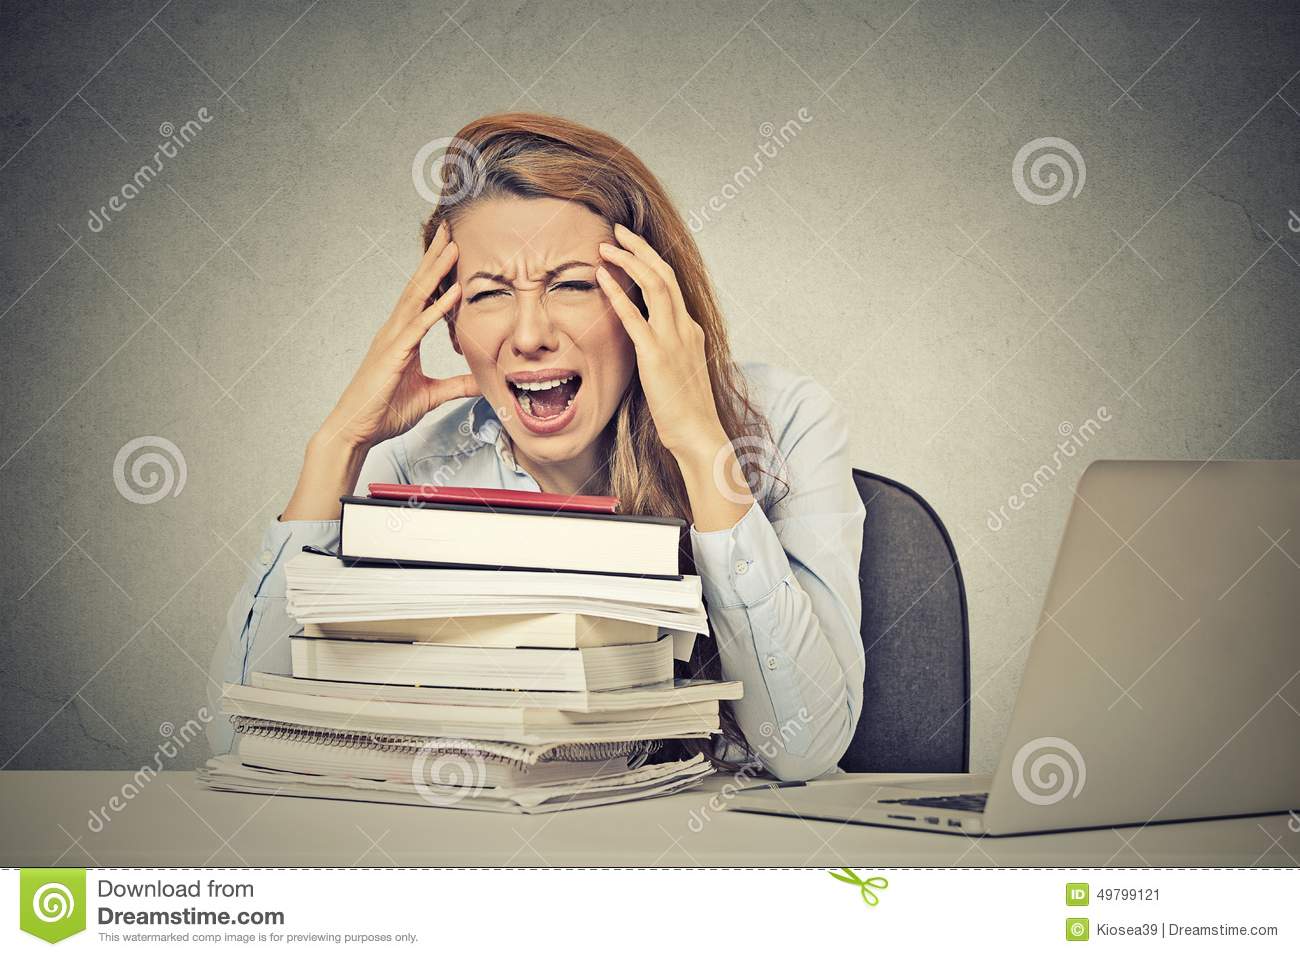 Sitting At Desk With Books Computer Stock Photo   Image  49799121